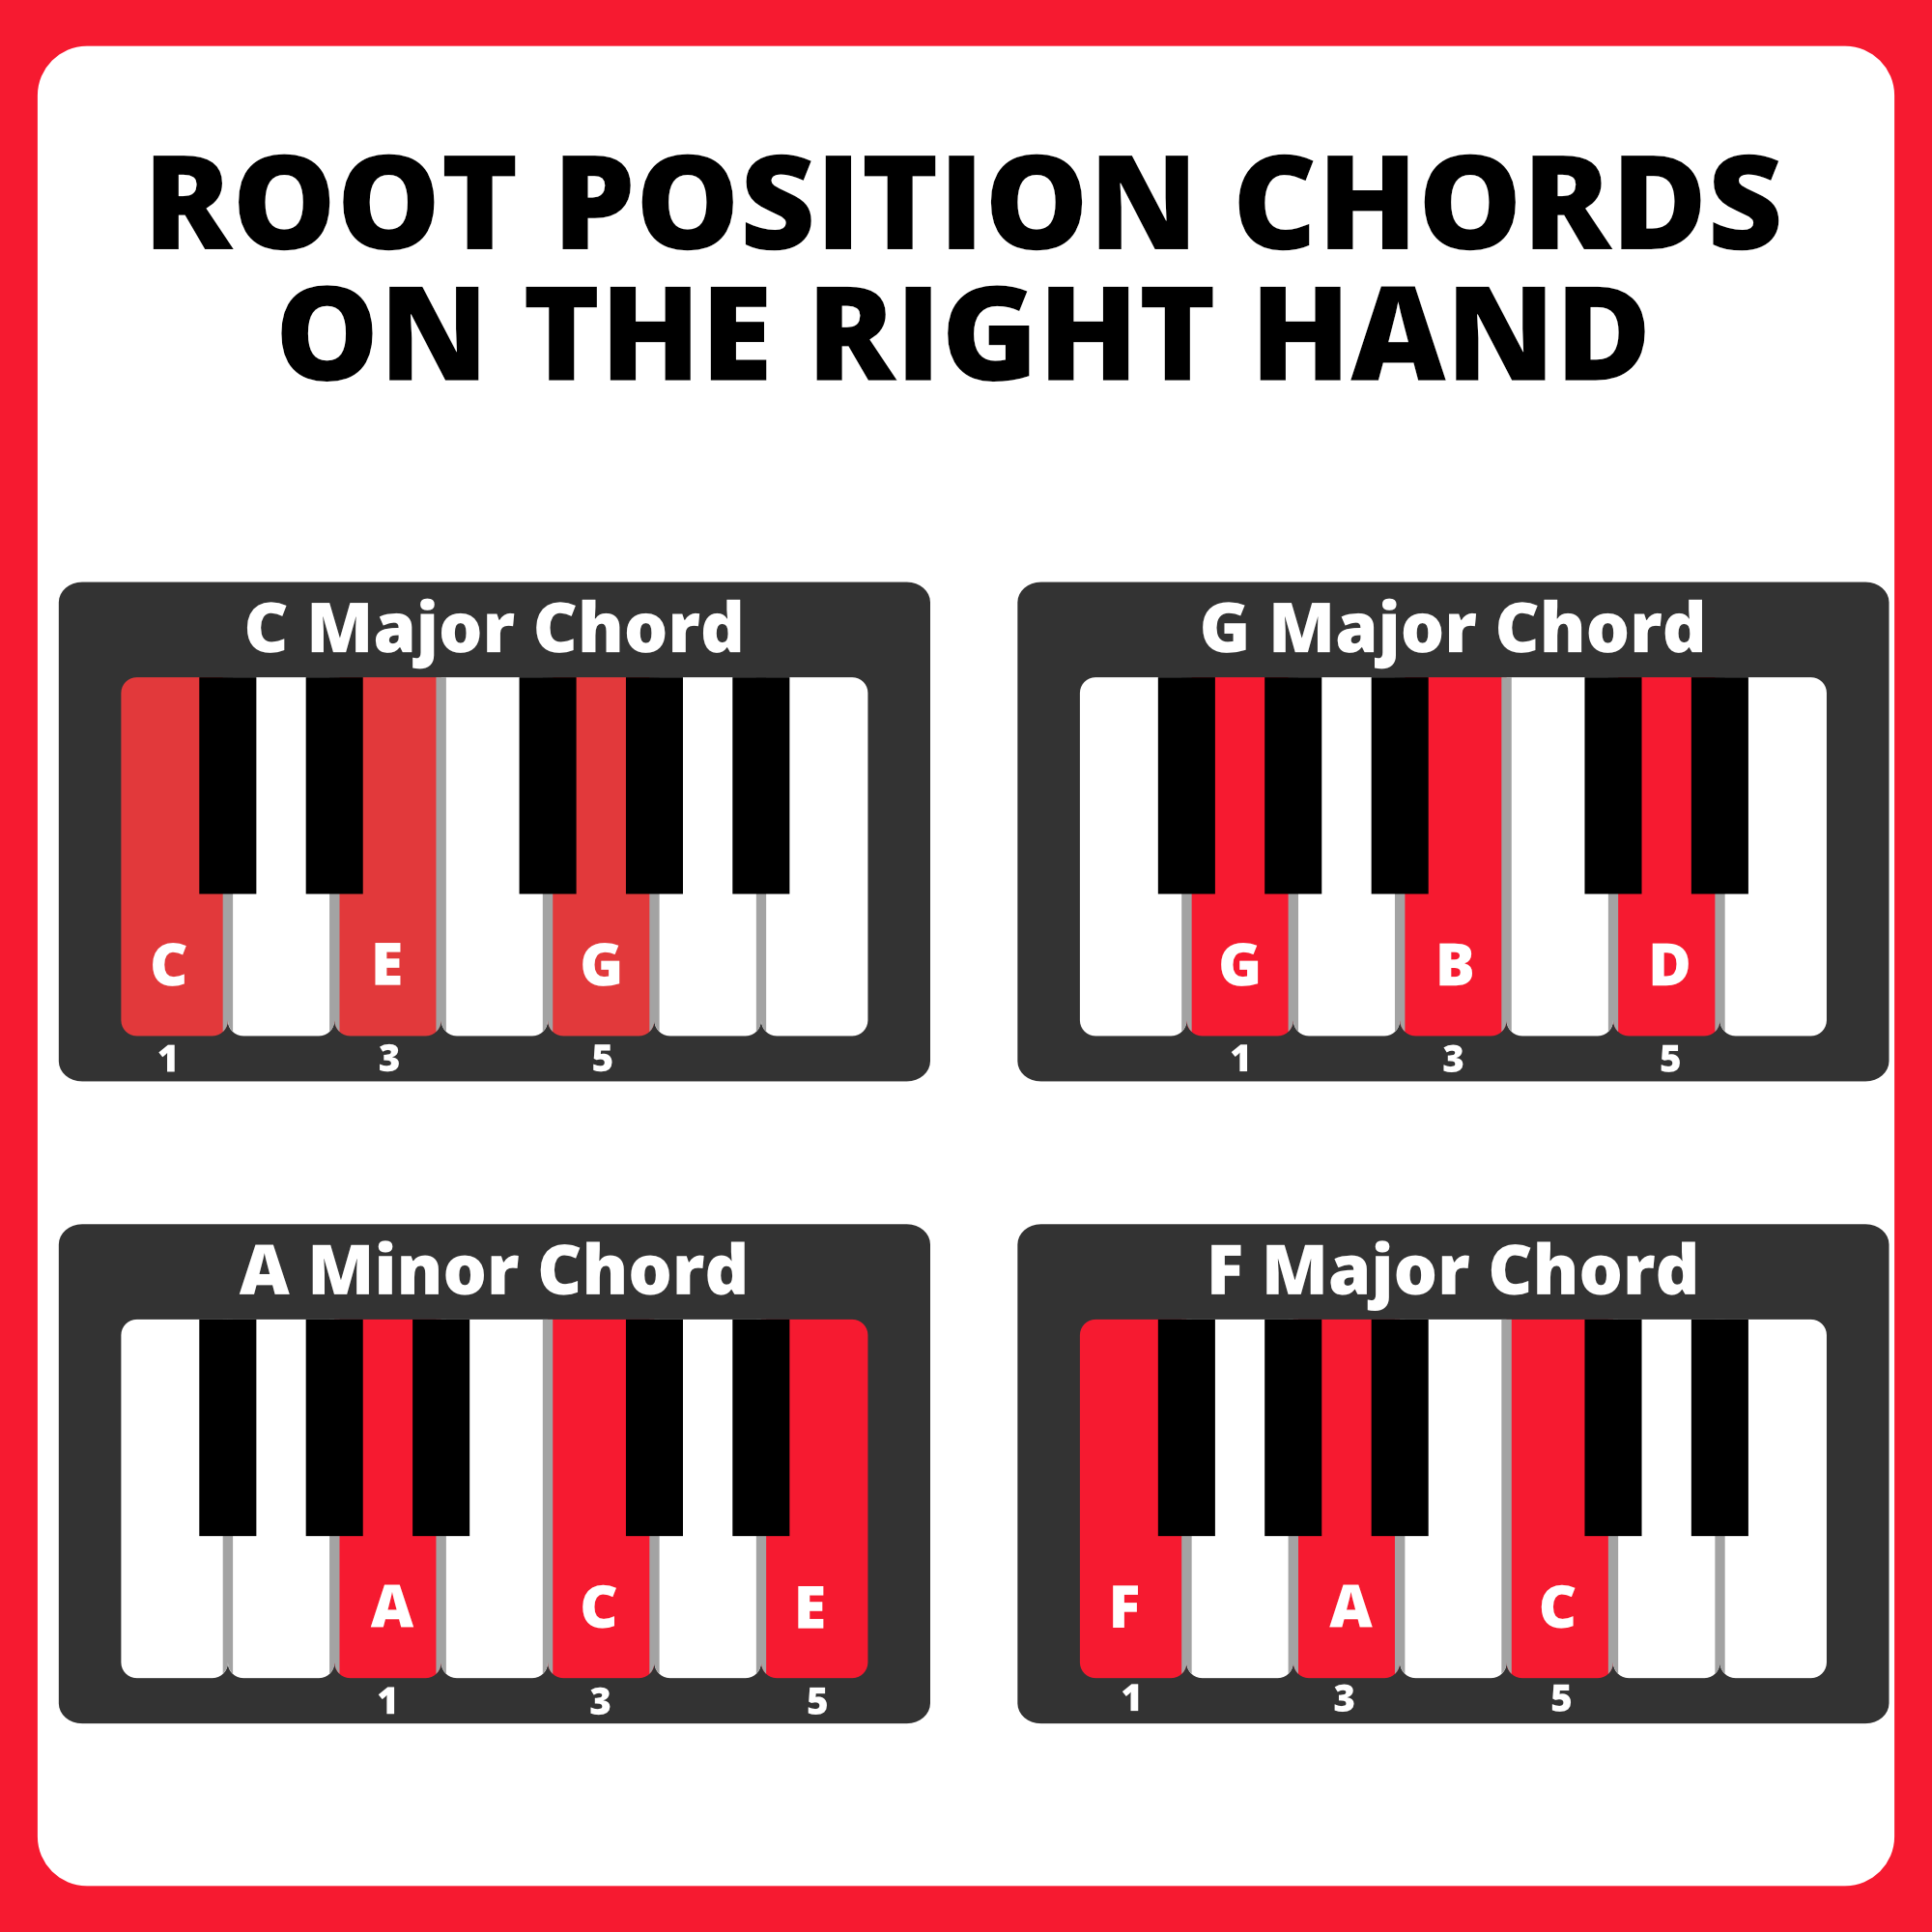 Diagram of root position chords on the right hand. C major chord is CEG played with fingers 1-3-5. G major is GBD fingers 1-3-5. A minor chord is ACE fingers 1-3-5. F major chord is FAC with fingers 1-3-5.